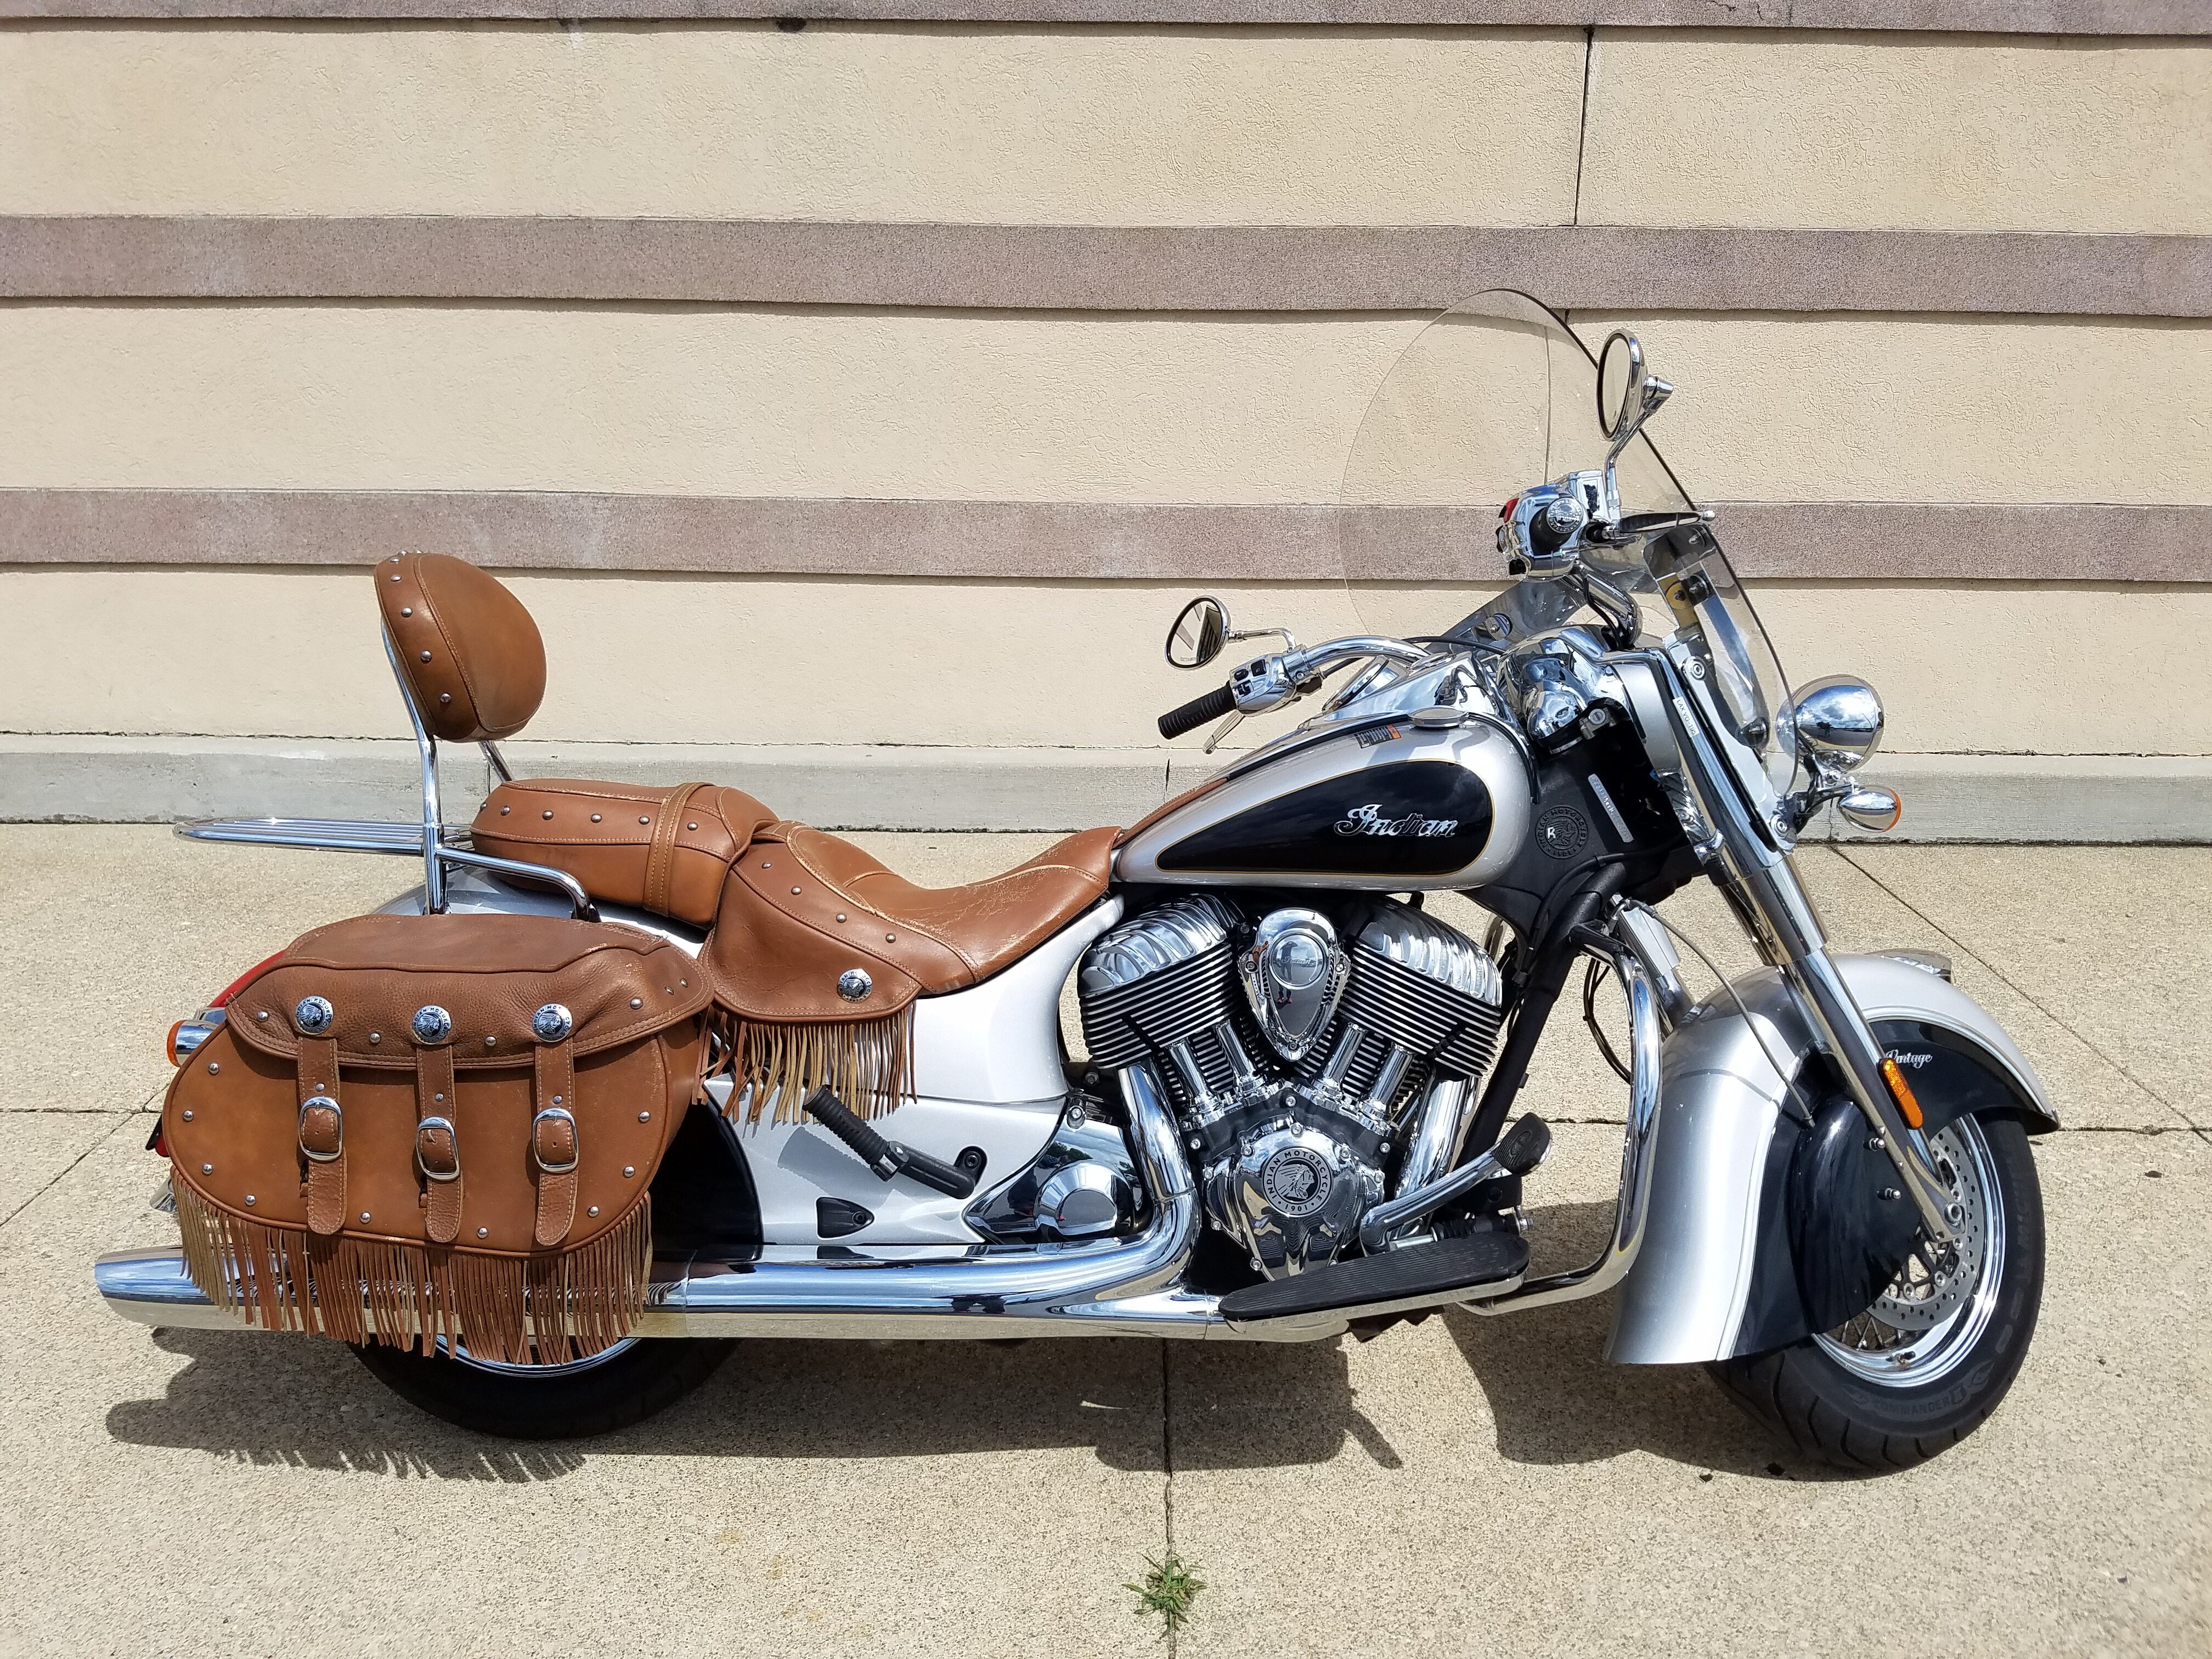 2016 Indian Chief Motorcycles for Sale - Motorcycles on Autotrader